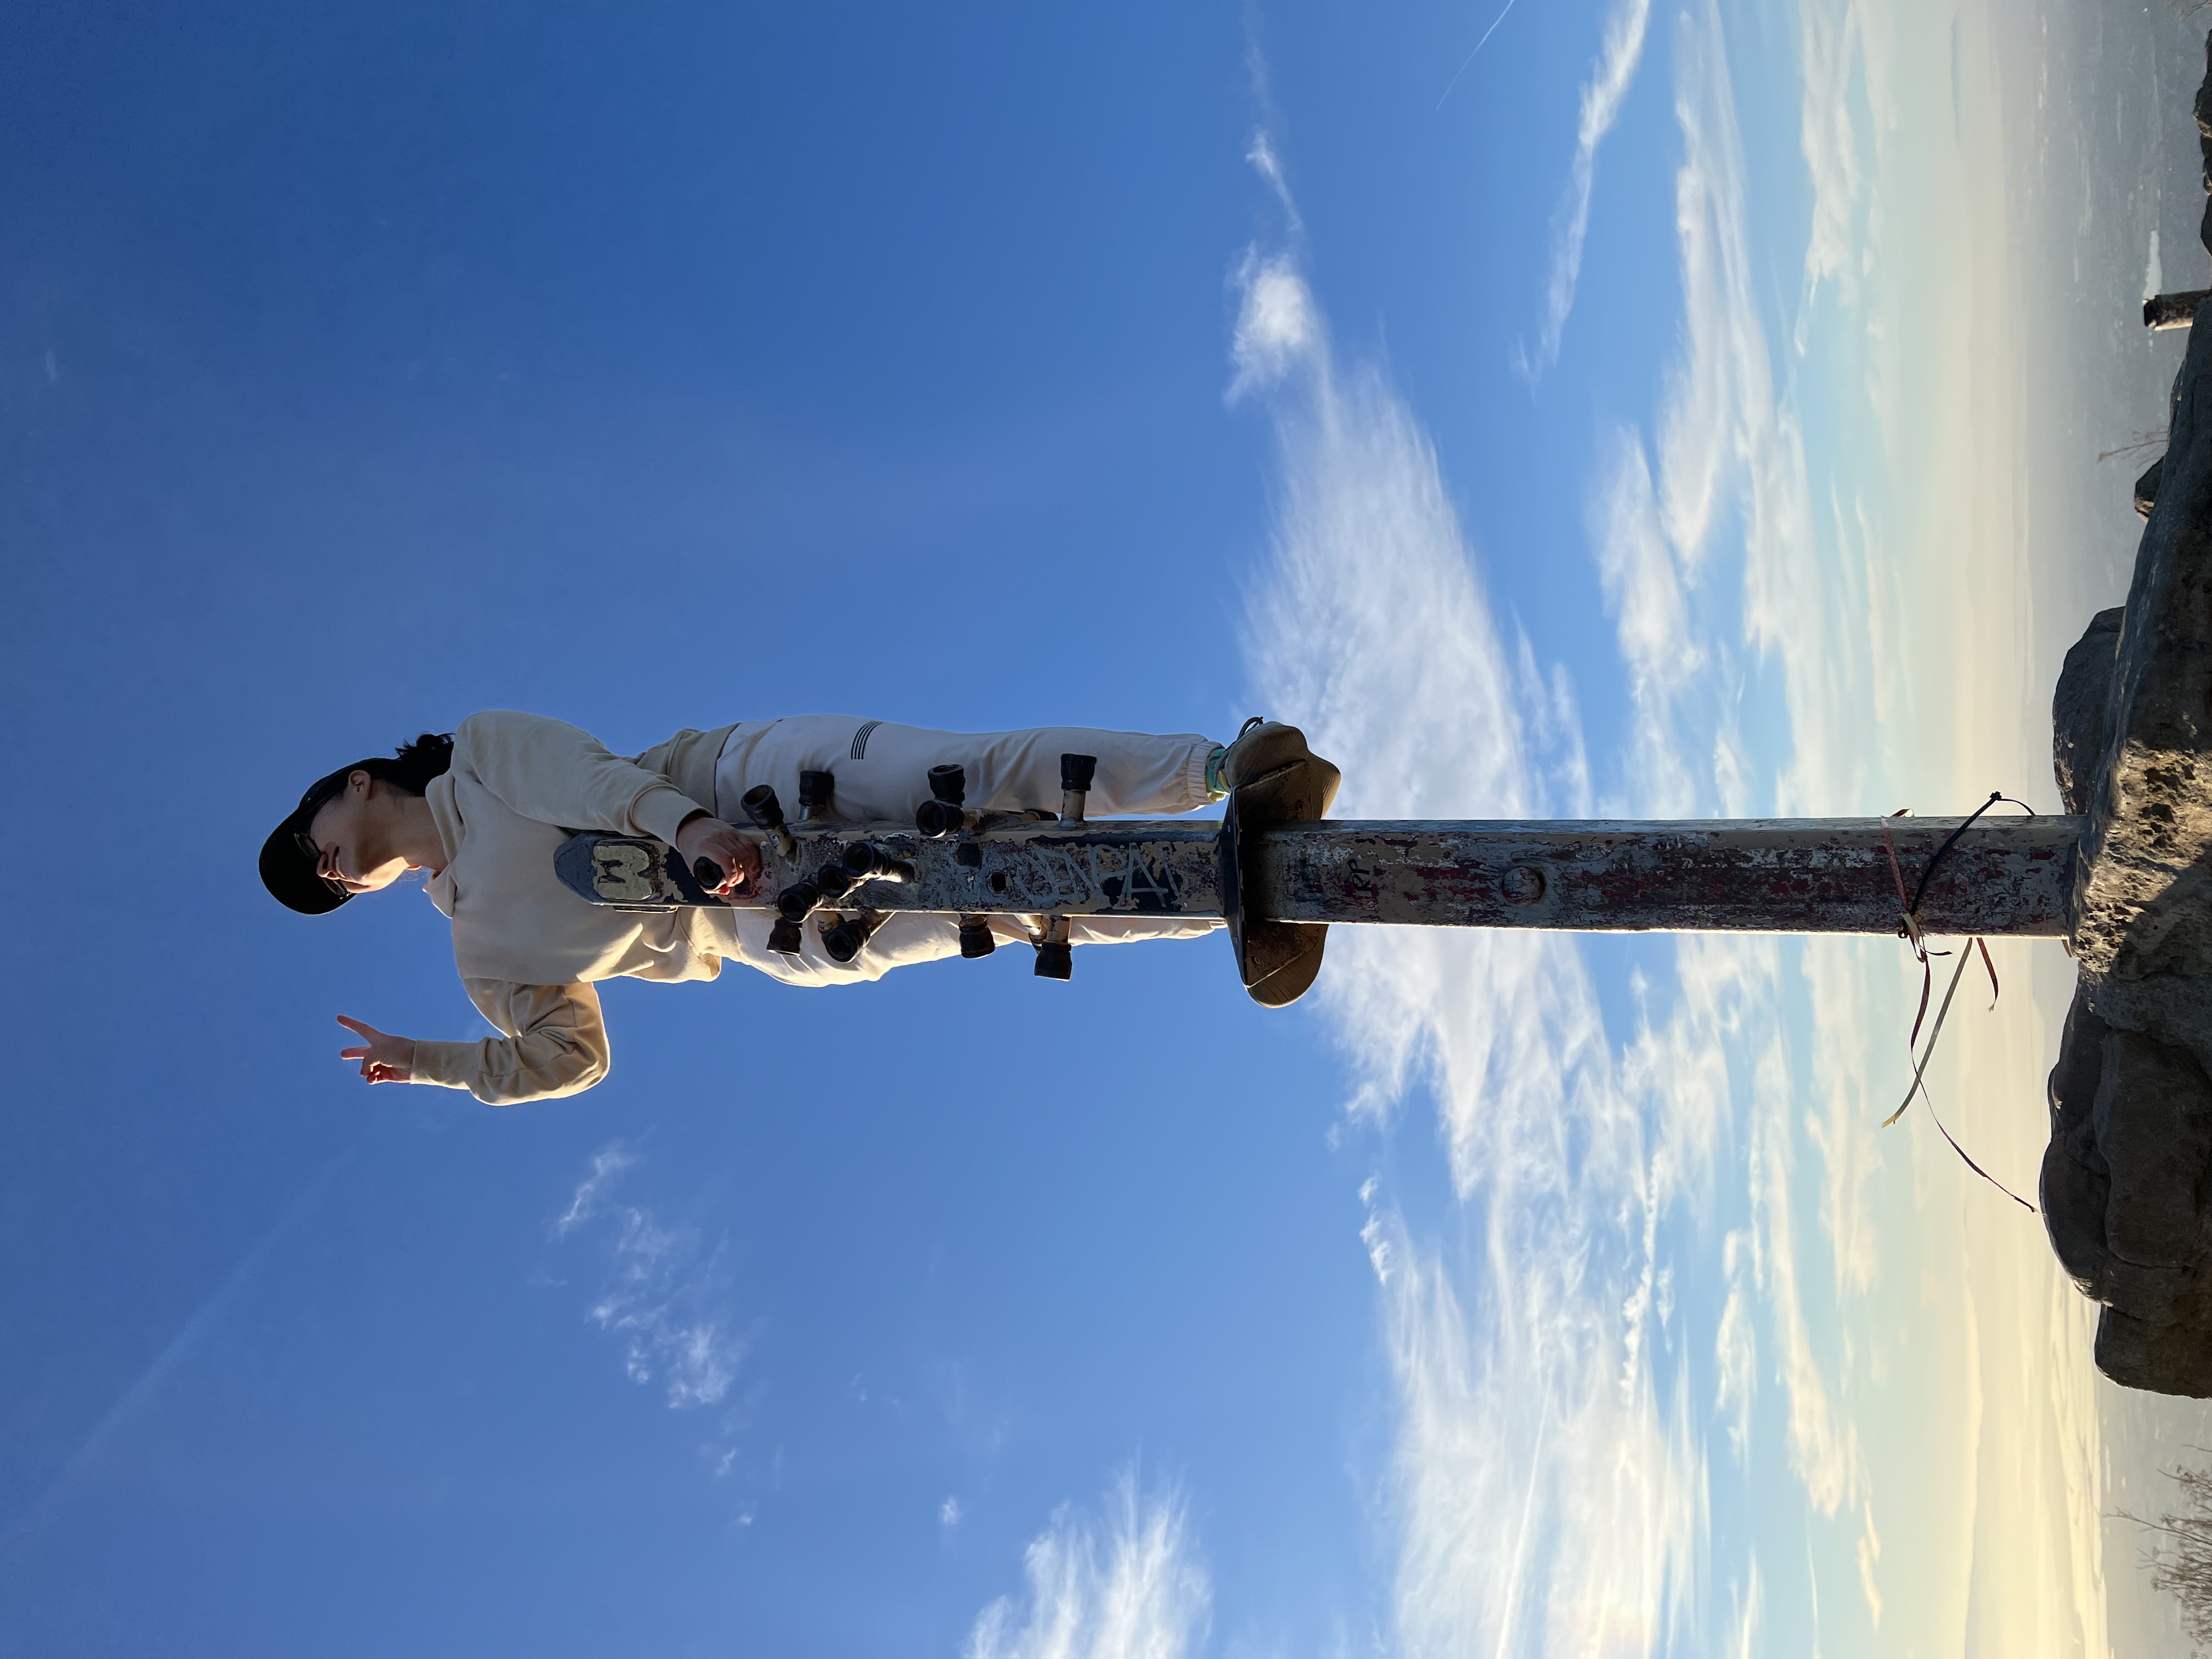 Person standing on a pole with horizontal protrusions acting as footrests similar to a pogo stick, atop a hilly peak. The background is blue sky with a few wispy clouds.